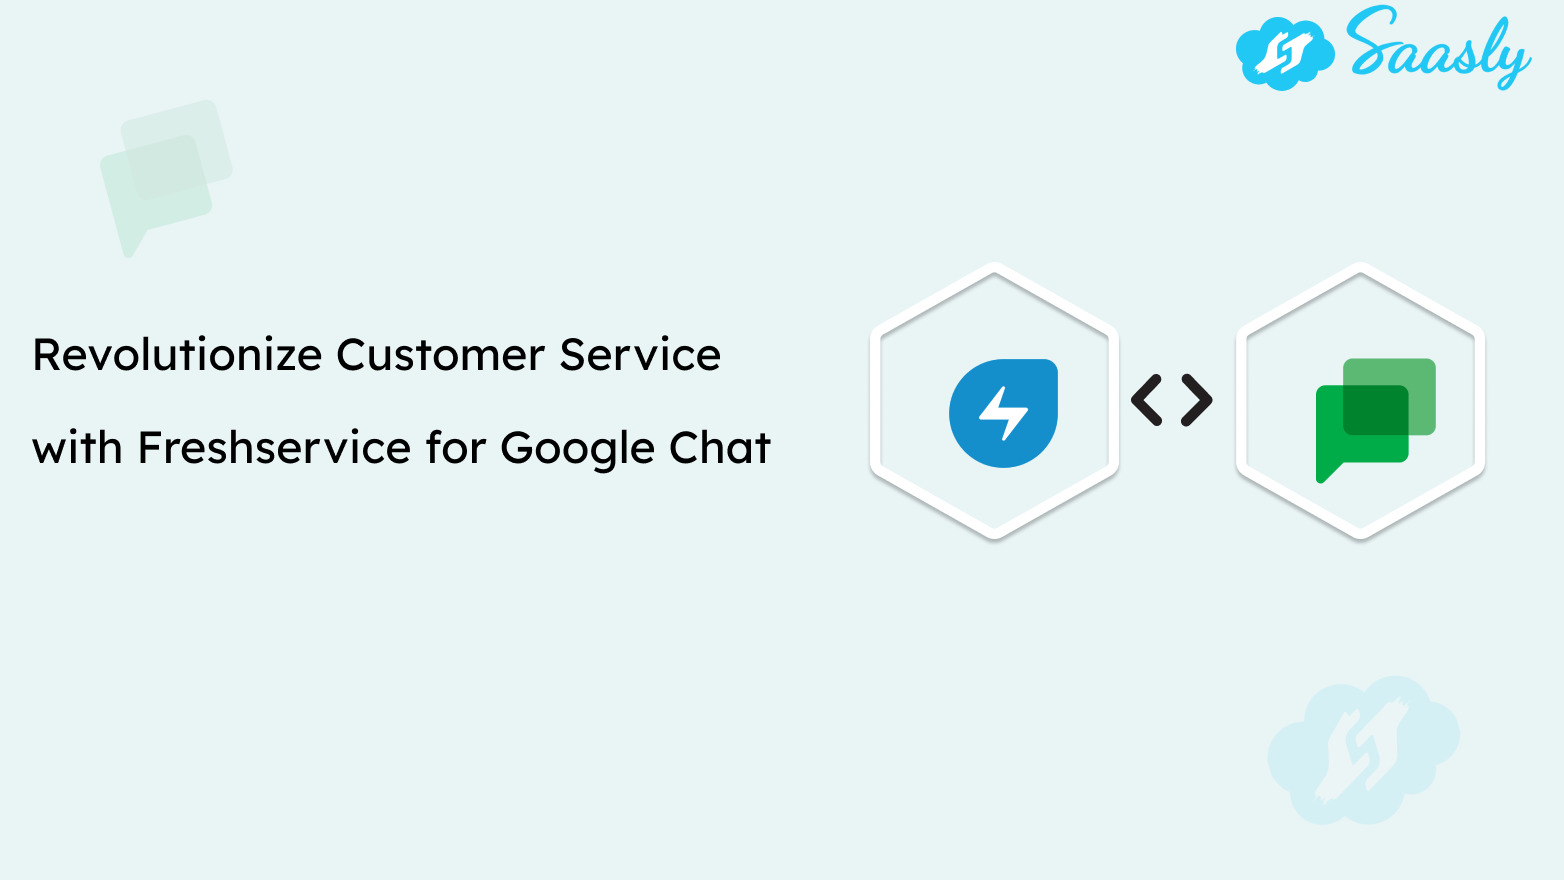 Revolutionize Customer Service with Freshservice for Google Chat